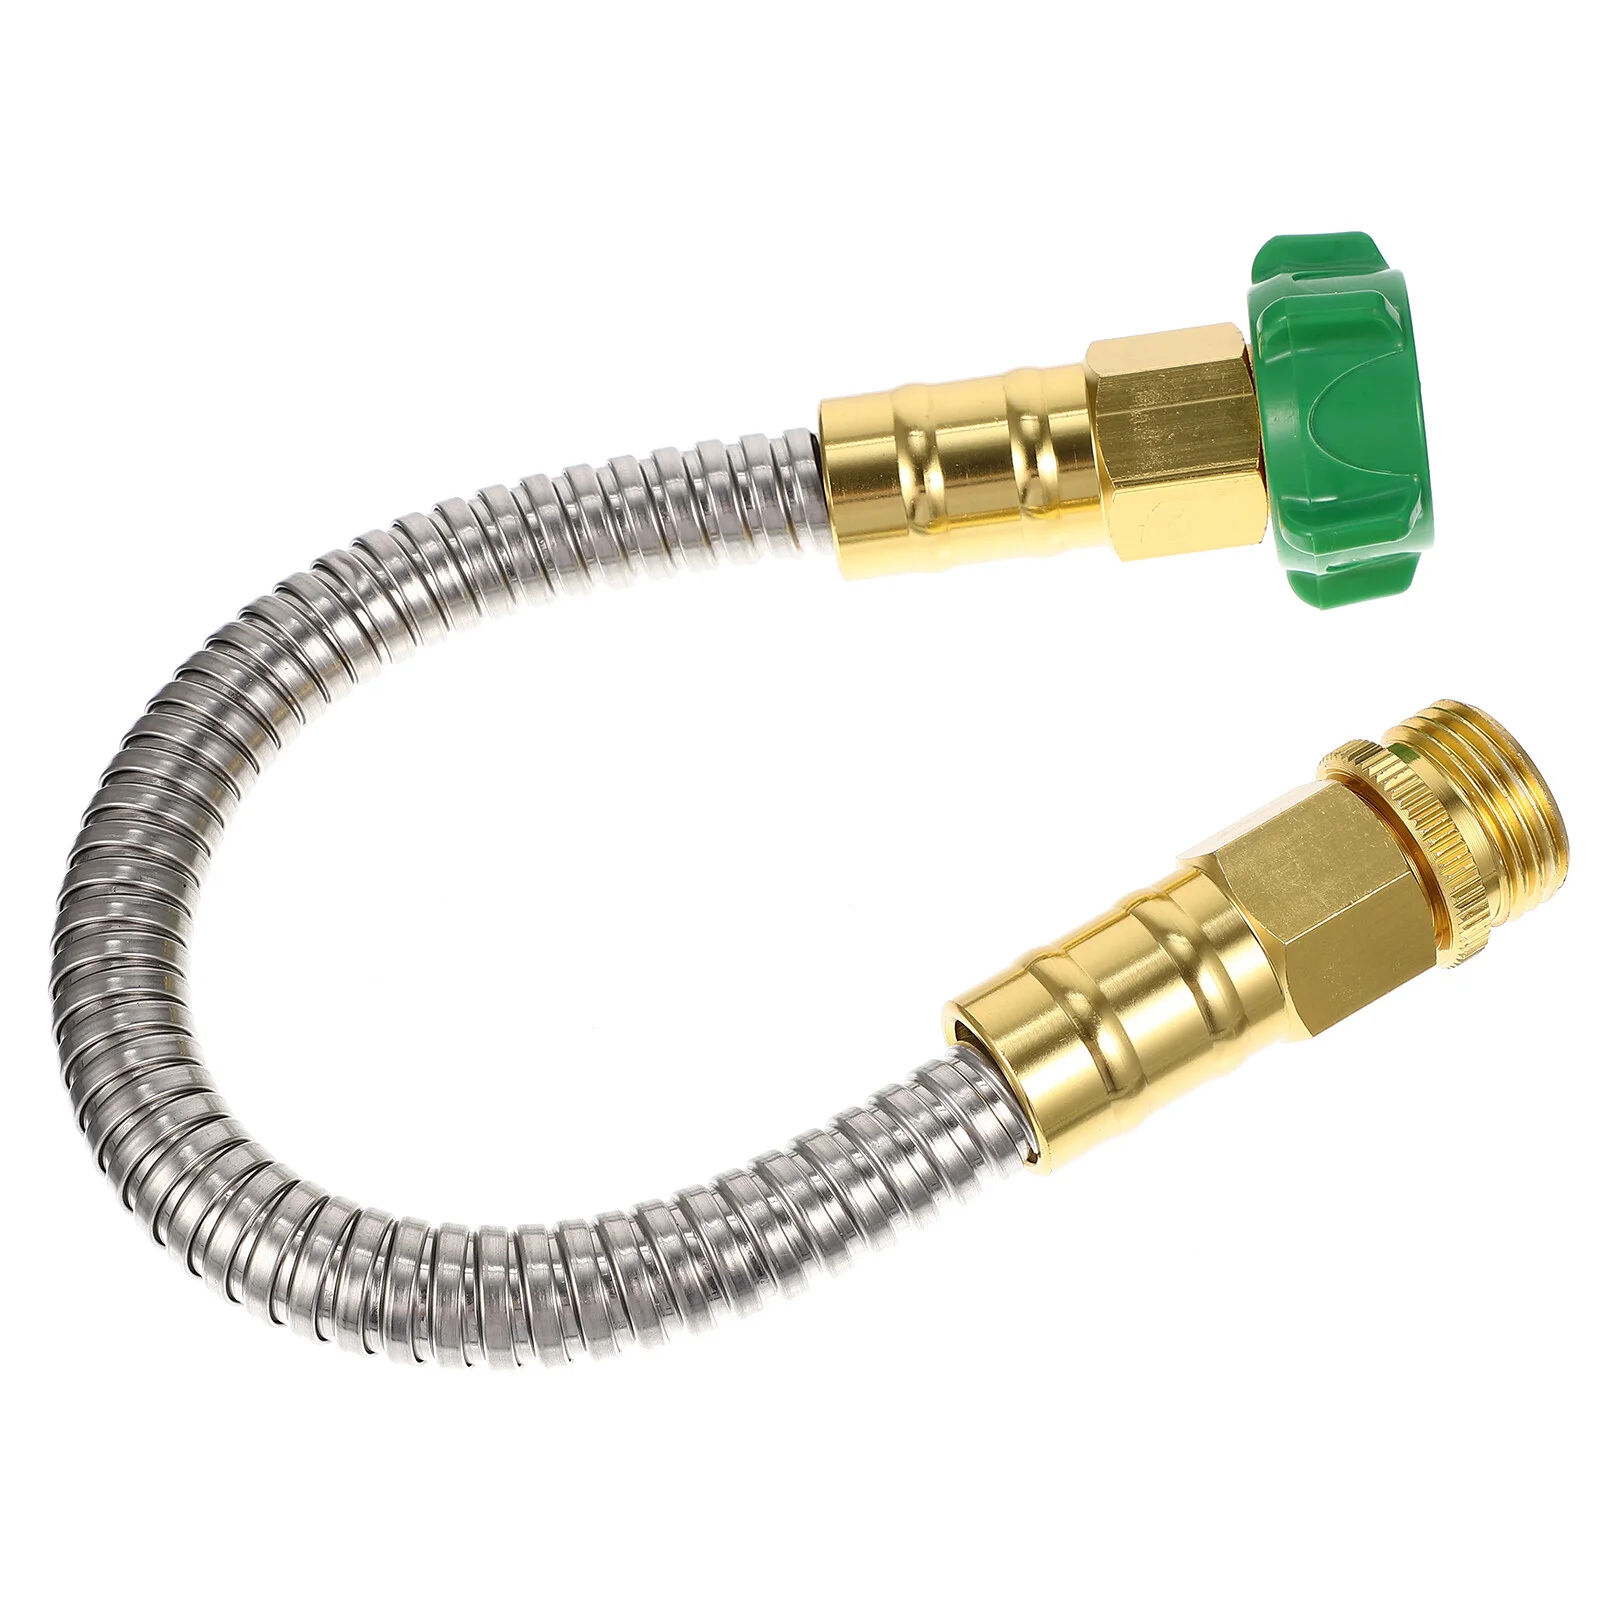 Heavy Duty Shower Hose Extension Accessories Water Hose Attachment Flexible Extension Stainless Steel Garden Metal